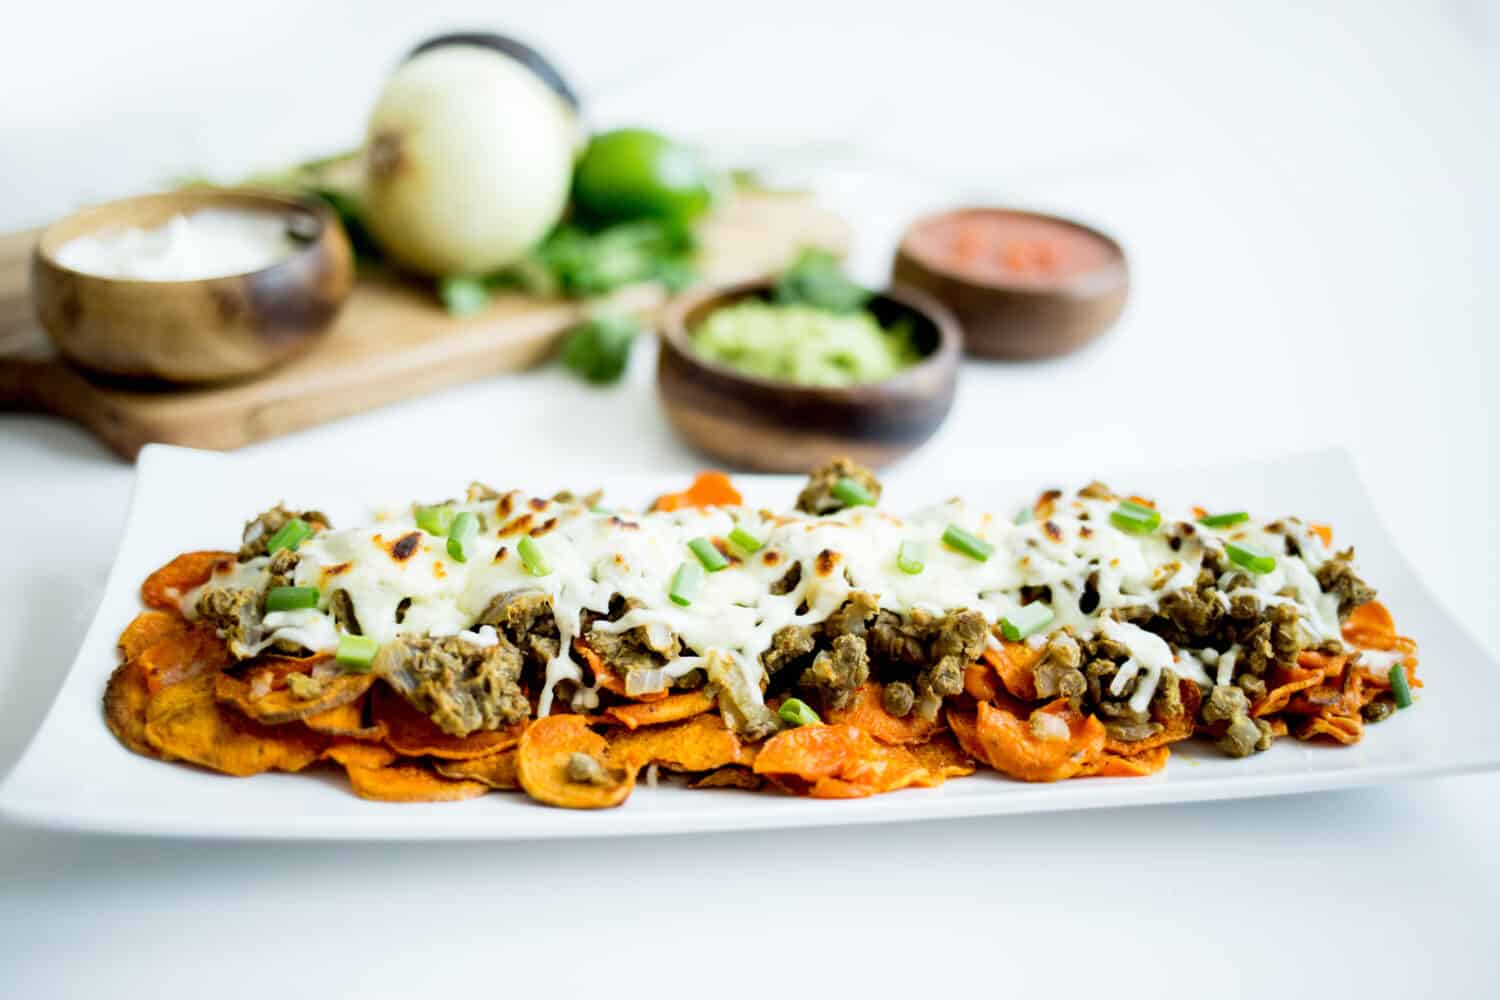 Nutritious Sweet Potato Loaded Nachos with salsa and guacamole